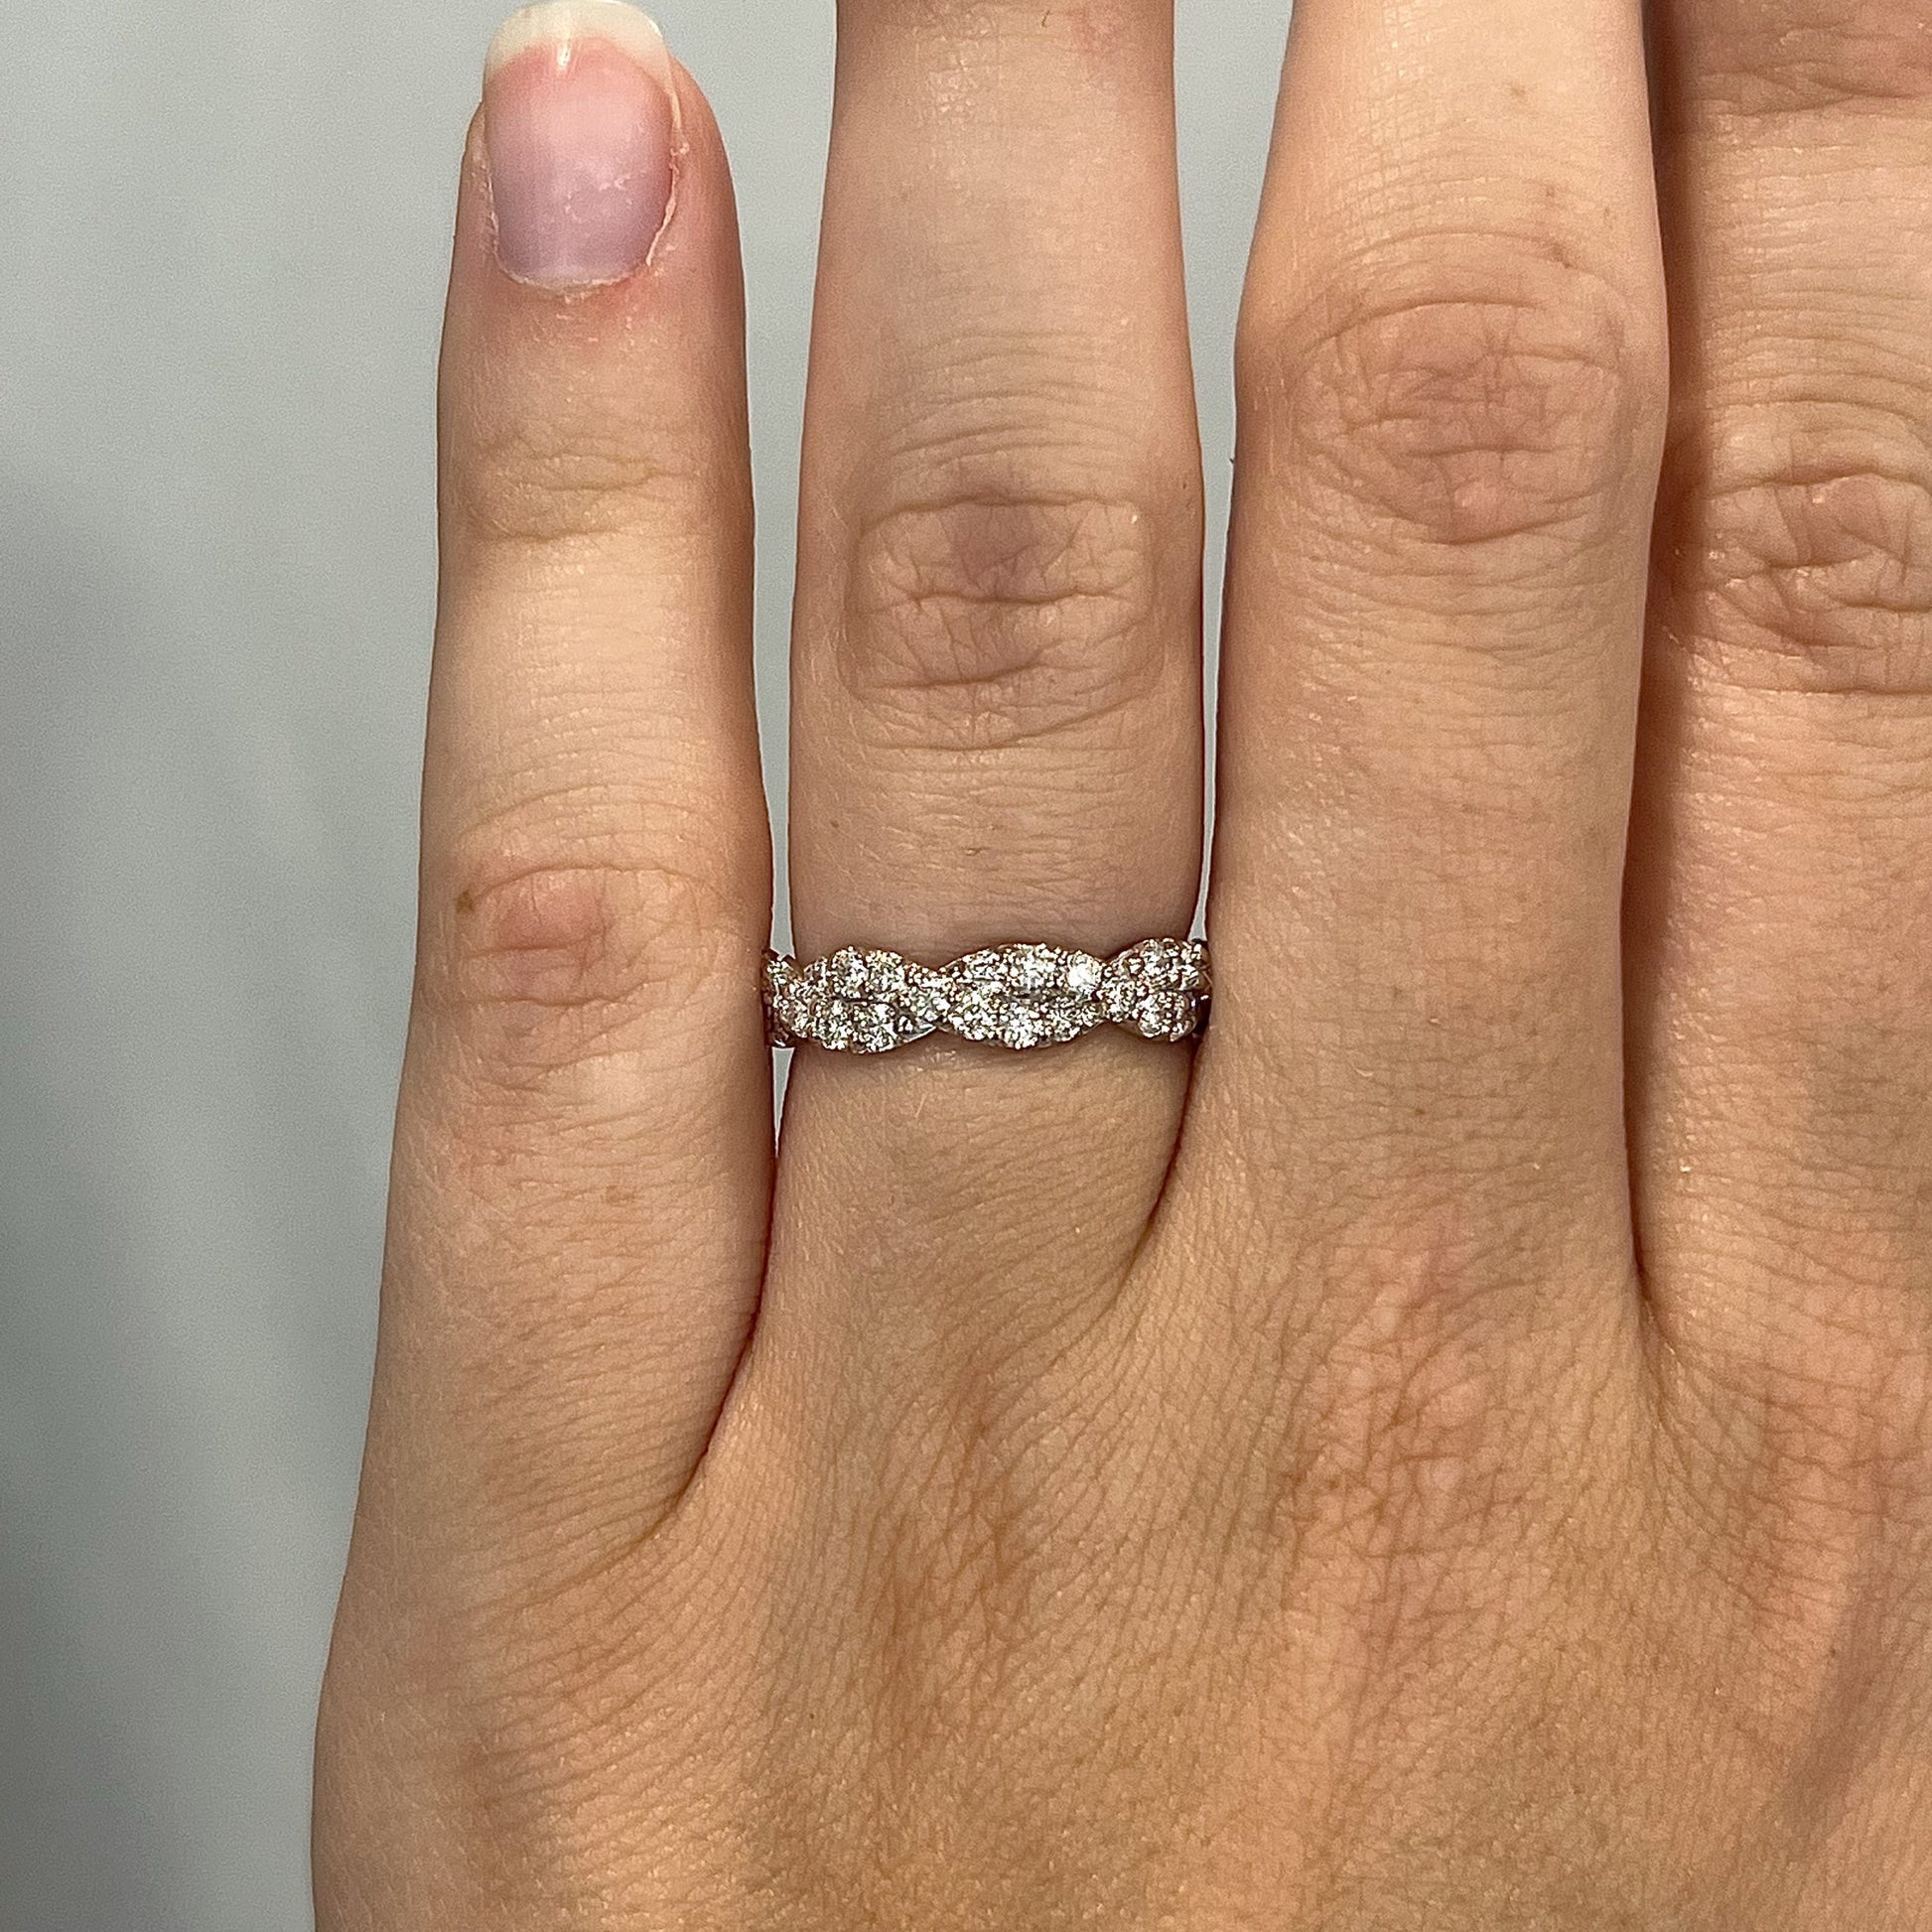 Braided Pave Diamond Wedding Band in 14k White GoldComposition: 14 Karat White Gold Ring Size: 7 Total Diamond Weight: .76ct Total Gram Weight: 3.2 g Inscription: 14k
      